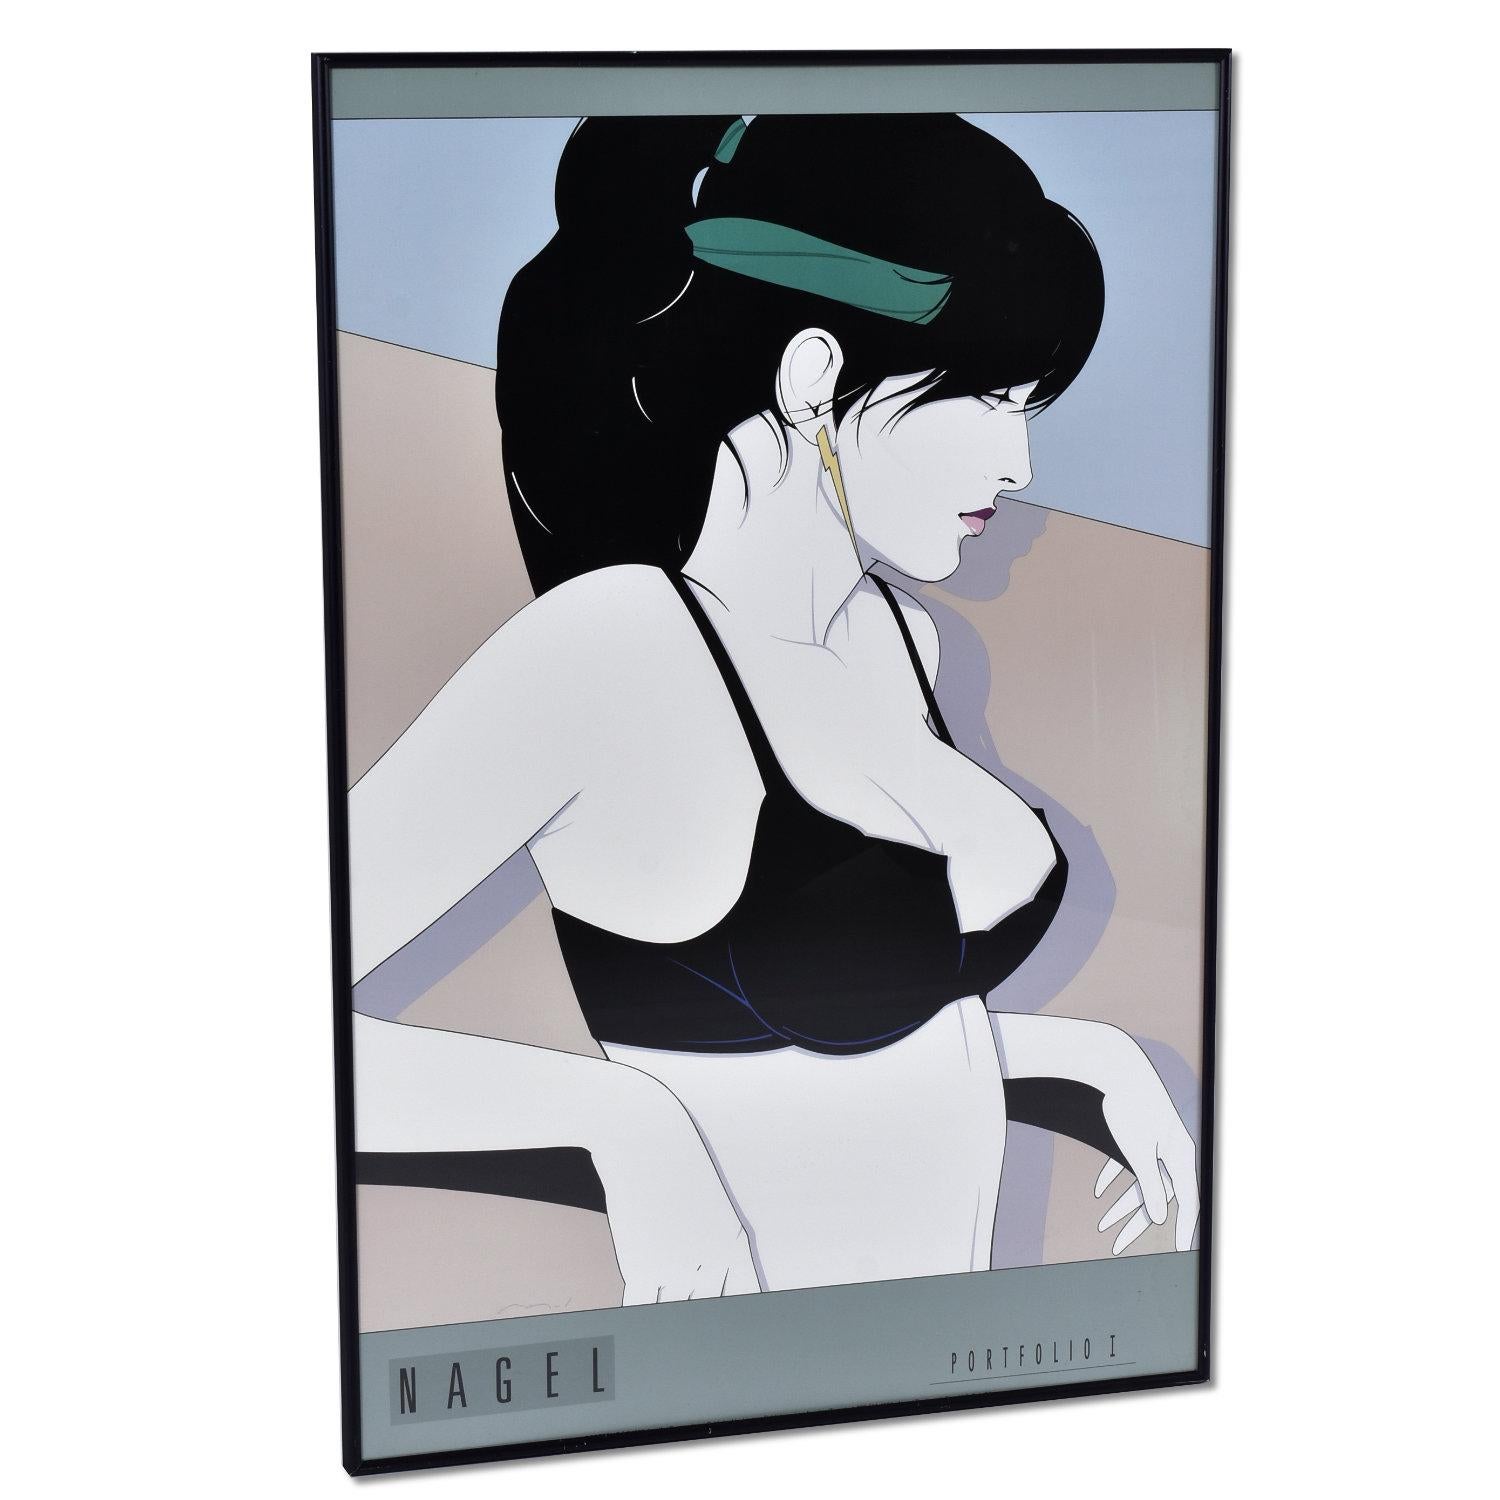 Pair of Patrick Nagel Framed Prints Portfolio 1 and Classic Visions For Sale 4